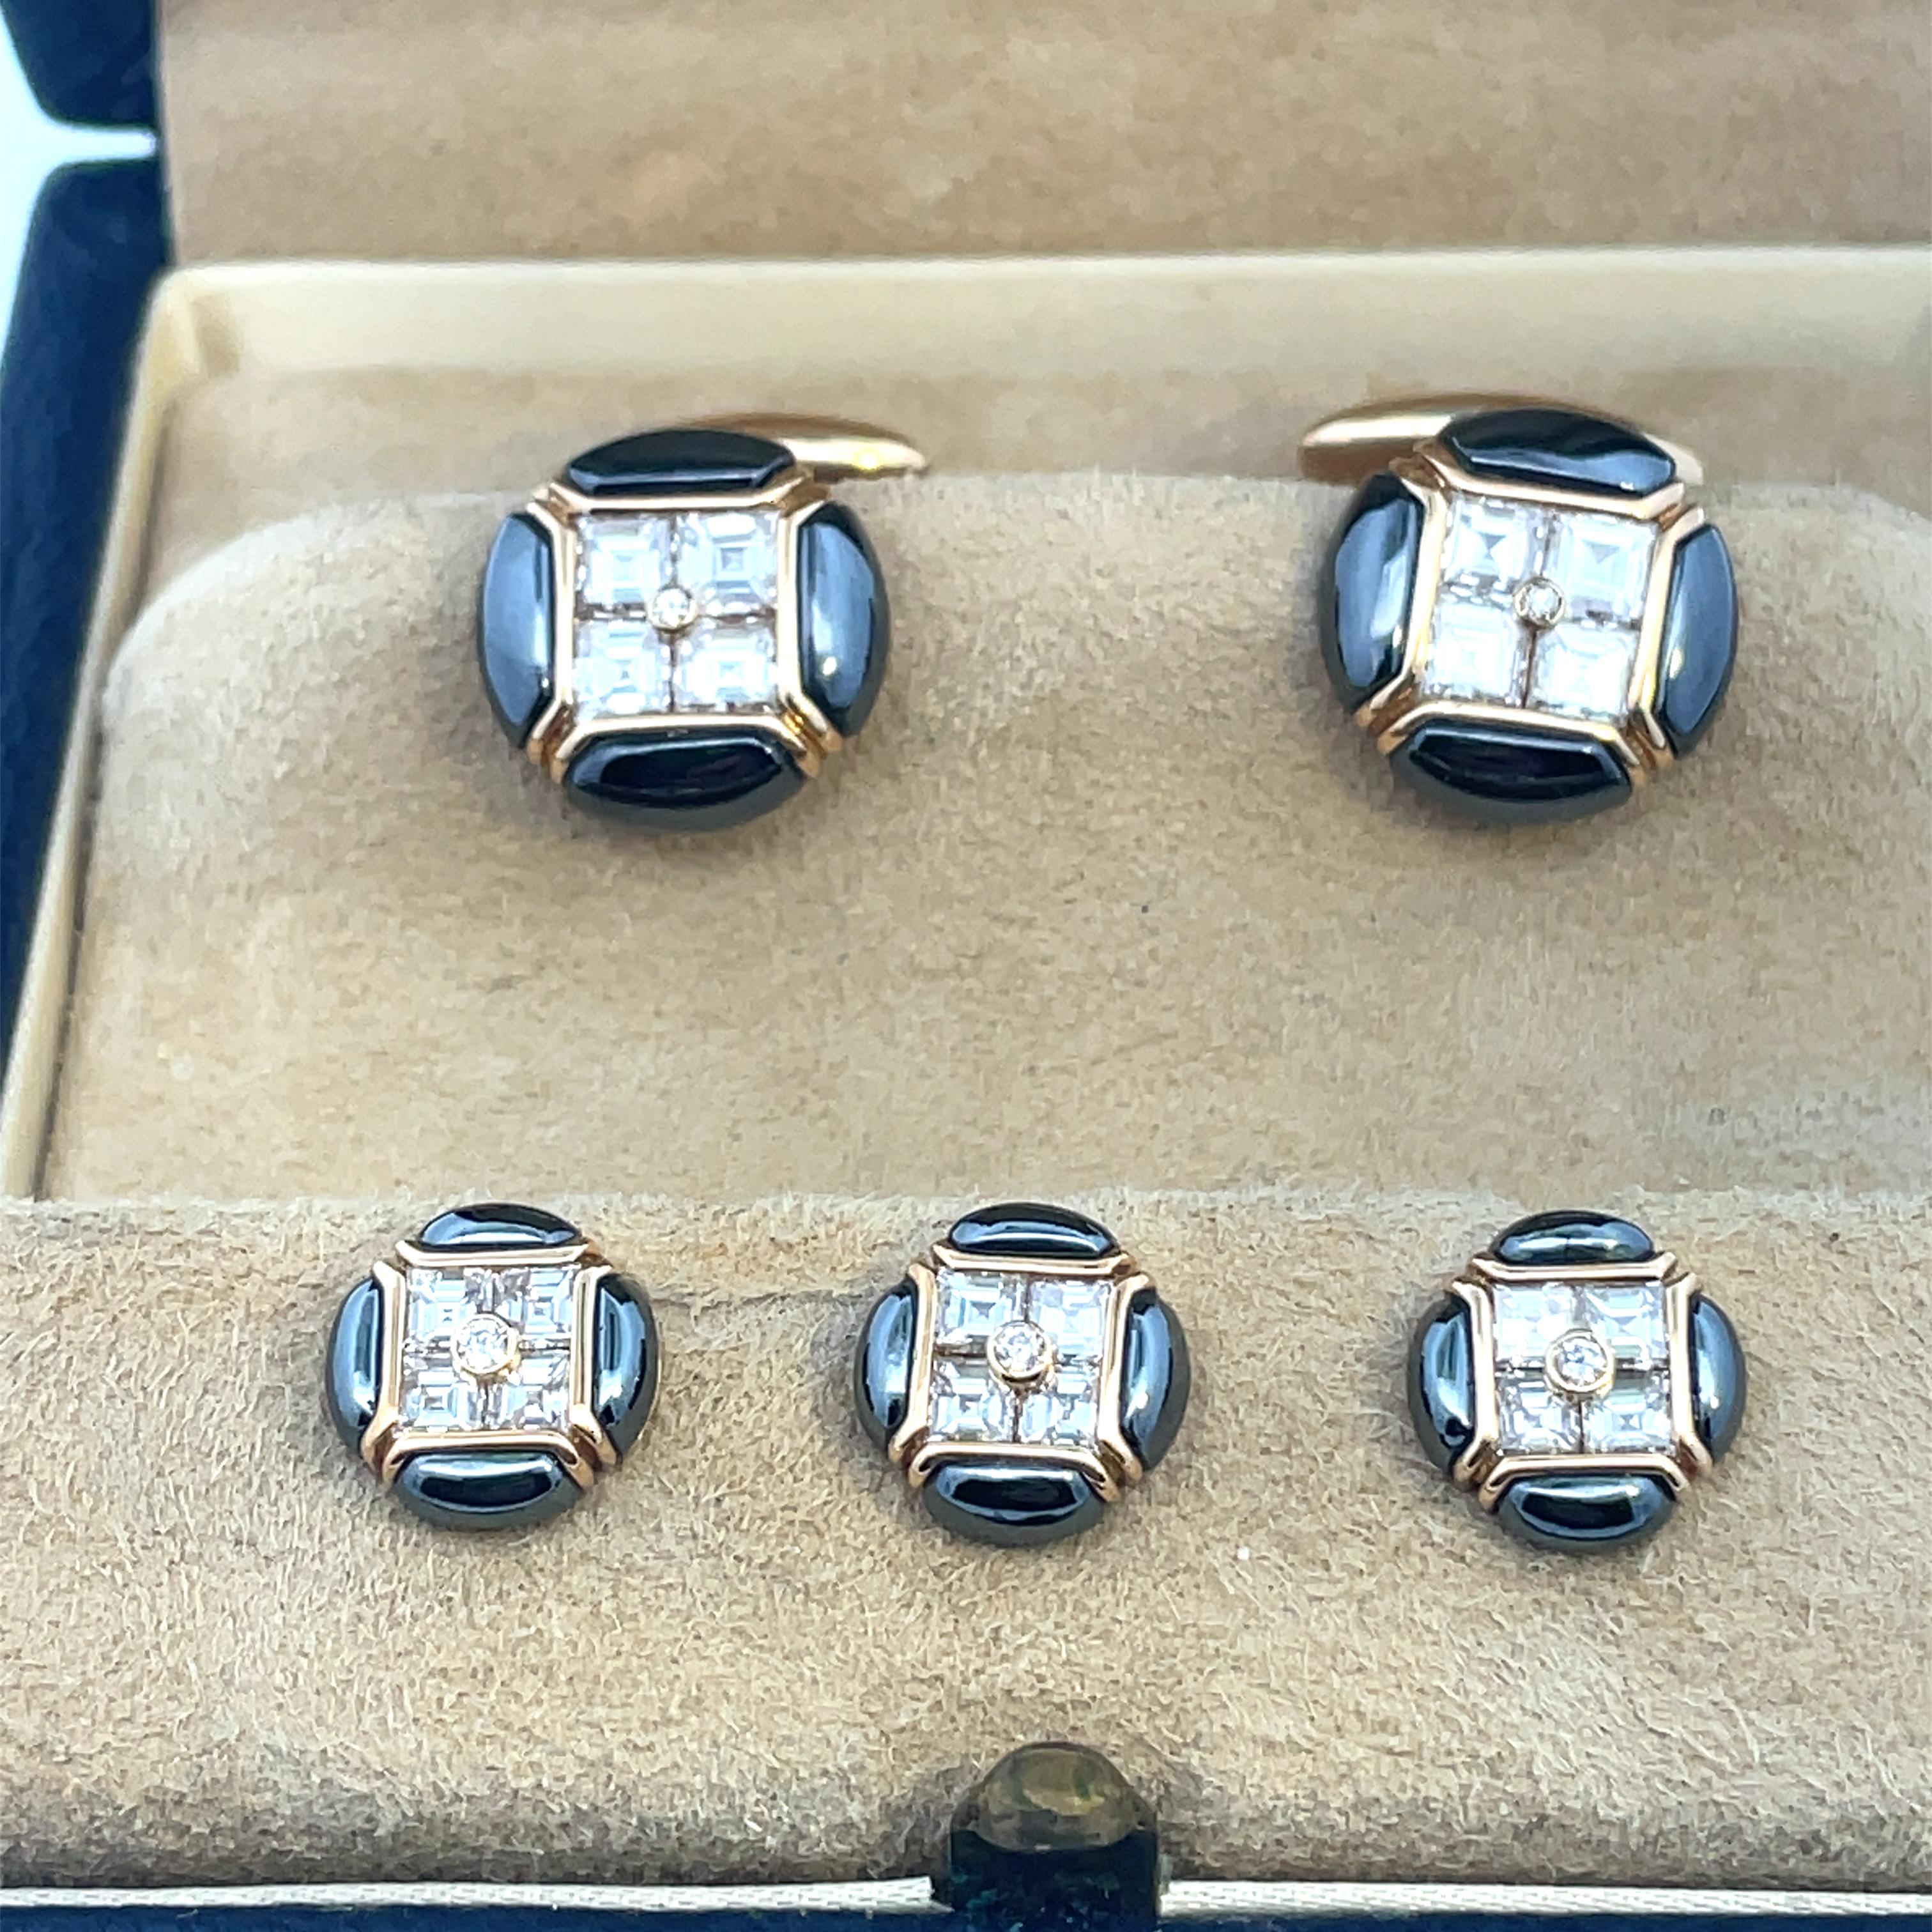 Vintage Bulgari Gold Hematite and Diamonds Dress Set Cufflinks In Excellent Condition For Sale In Milano, IT